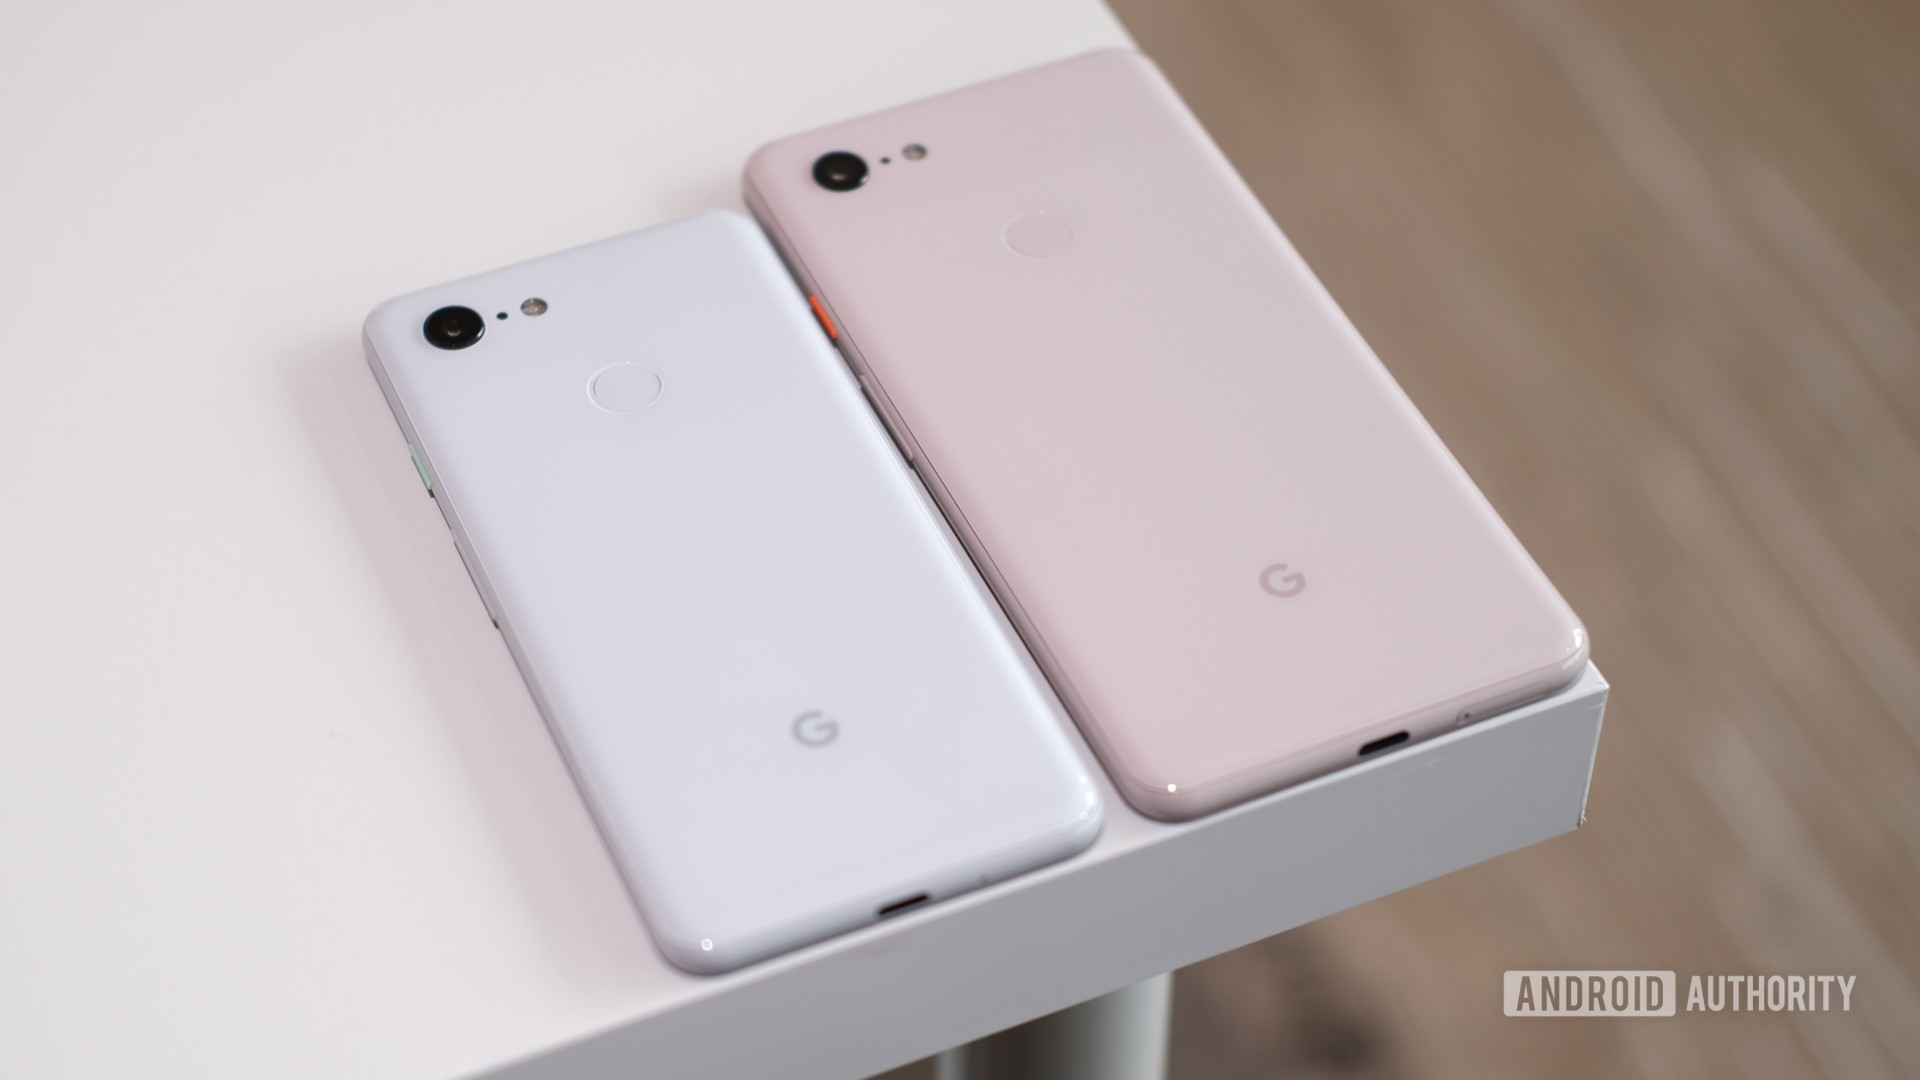 Google Pixel 3 in white and Pixel 3 XL in pink side-by-side on a table.